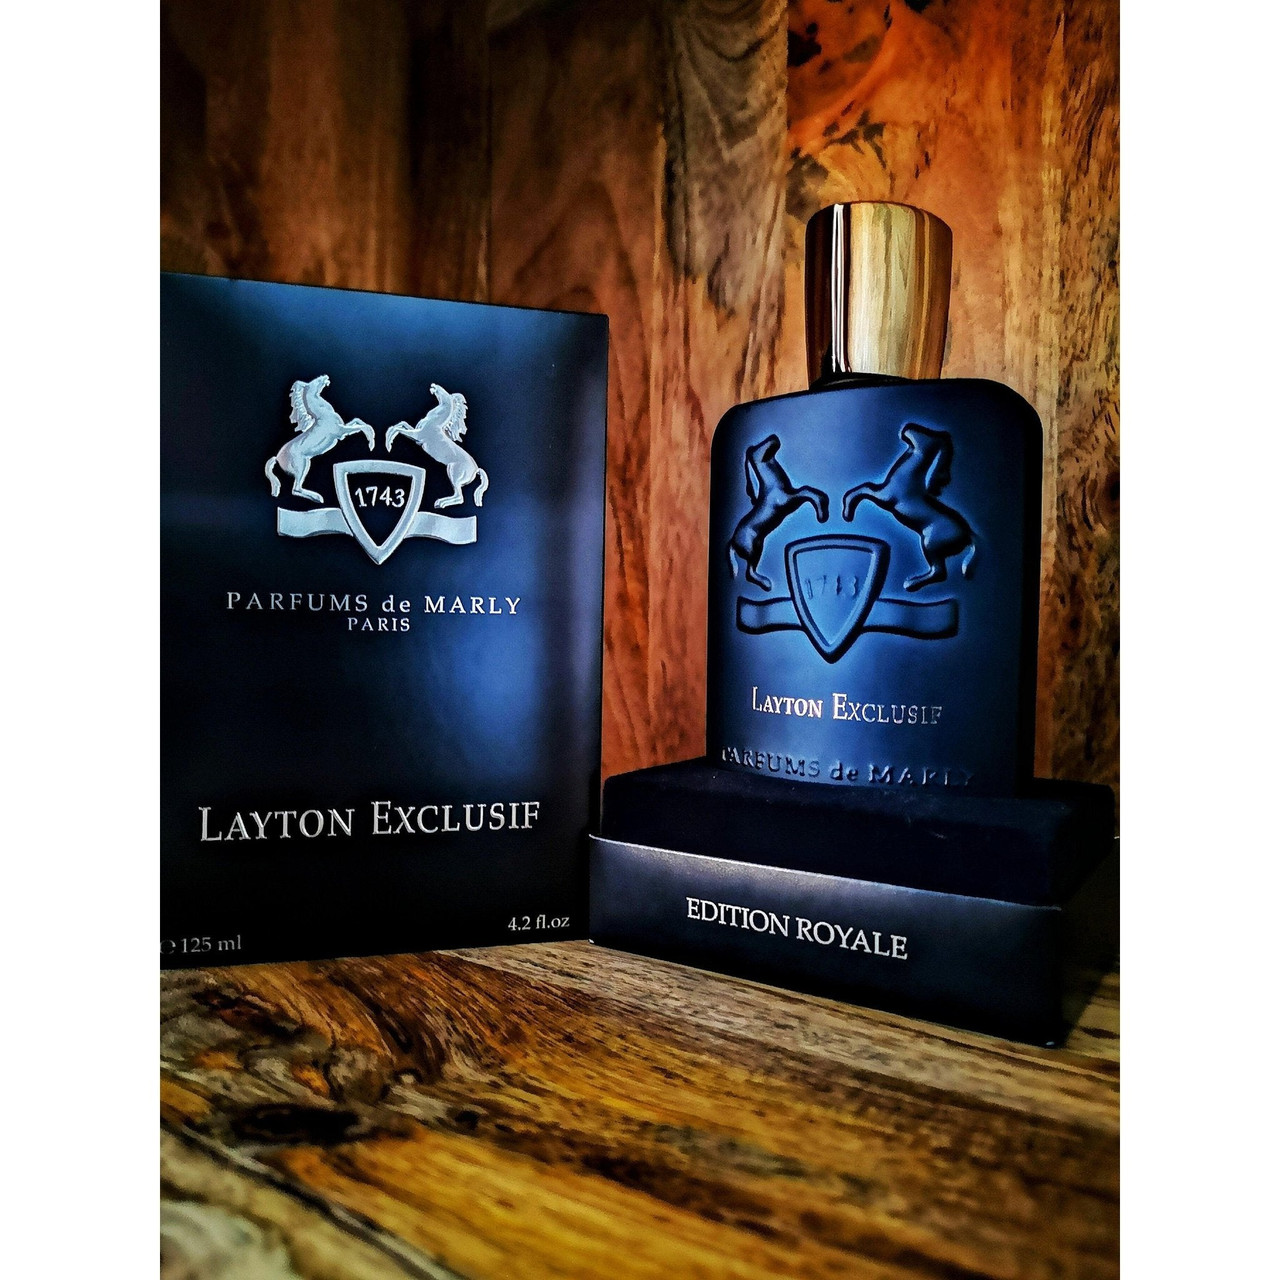 Layton Exclusif Cologne by Parfums De Marly